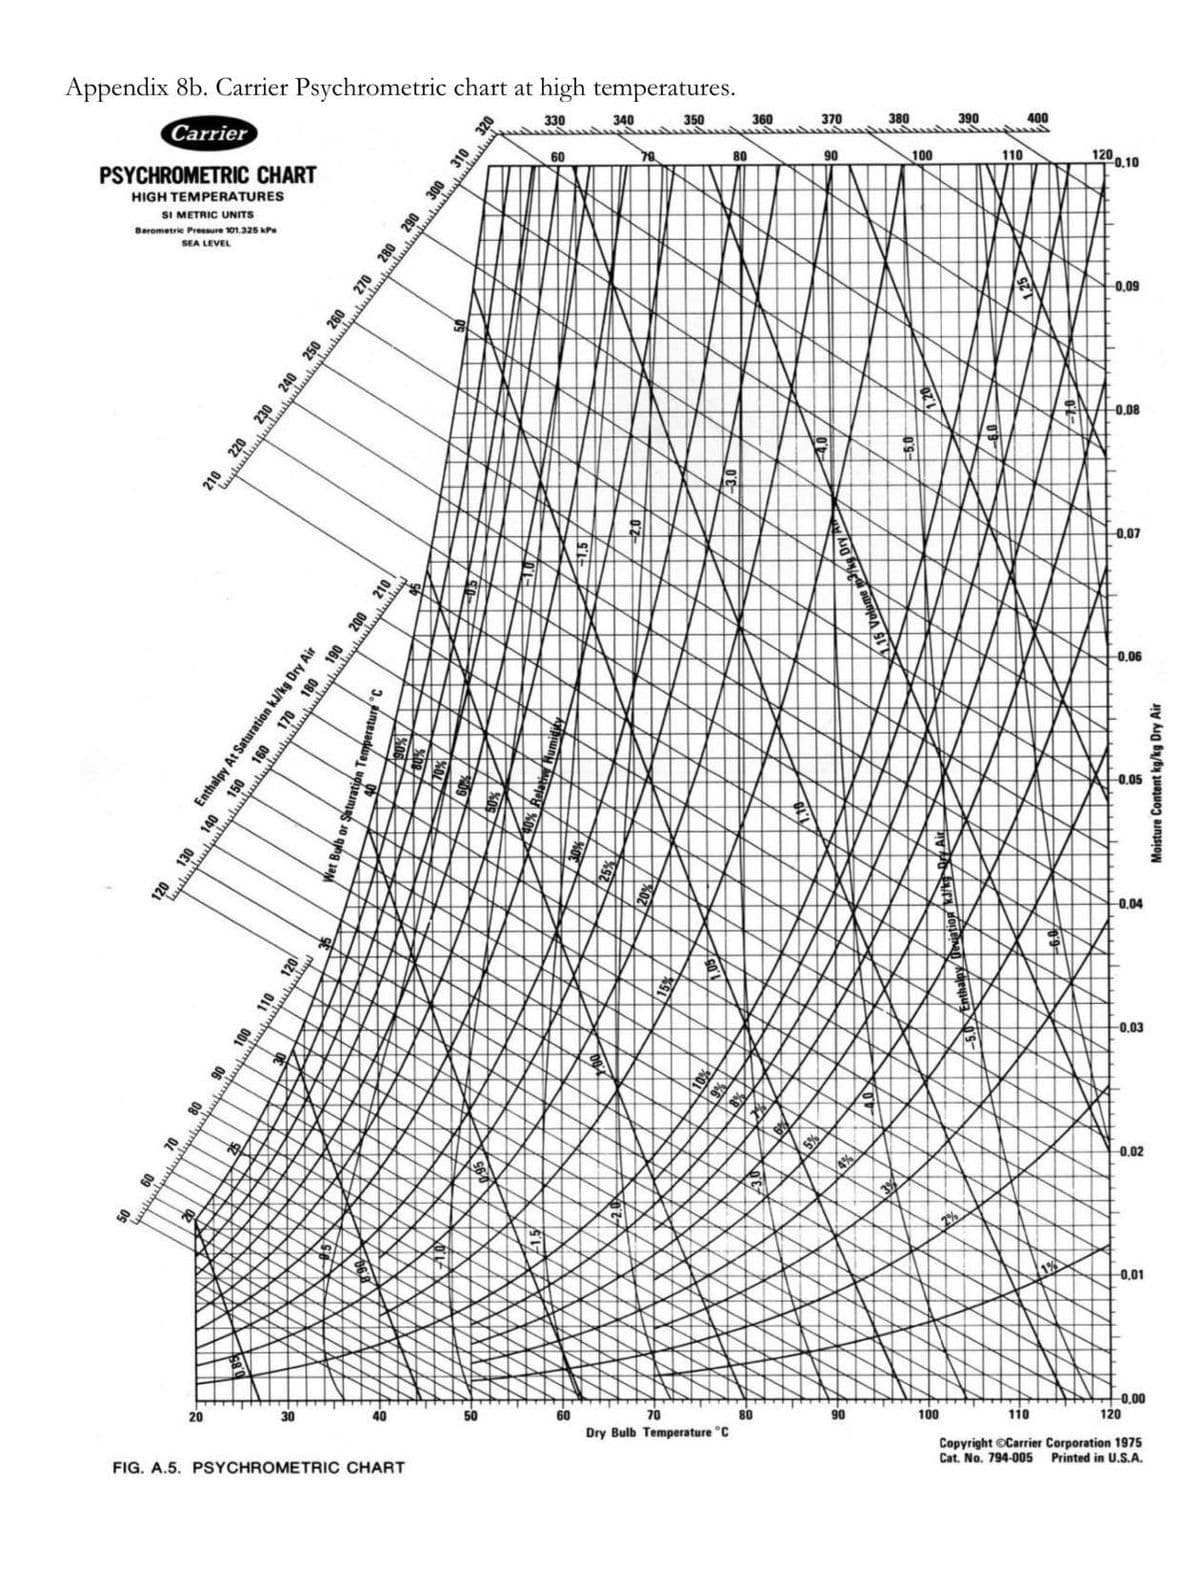 Appendix 8b. Carrier Psychrometric chart at high temperatures.
Carrier
320
330
340
350
360
370
380
390
400
PSYCHROMETRIC CHART
60
80
90
HIGH TEMPERATURES
100
110
1201
SI METRIC UNITS
0,10
Barometrie Pressure 101.325 KPa
SEA LEVEL
0,09
0.08
0,07
0,06
0.05
-0.04
120
110
-0.03
5%
0,02
-0,01
20
30
40
50
60
70
Dry Bulb Temperature °C
80
90
-0,00
120
100
110
FIG. A.5. PSYCHROMETRIC CHART
Copyright ©Carrier Corporation 1975
Cat. No. 794-005 Printed in U.S.A.
210
220
250 260
270 280 290
300
310
Enthalpy At Saturation kJ/kg Dry Air
120
130
140
150
160 170, 180
190 200 210
Wet Bulb or Saturatipn Temperature C
10
10%
[ 9%
8%
Moisture Content kg/kg Dry Air
